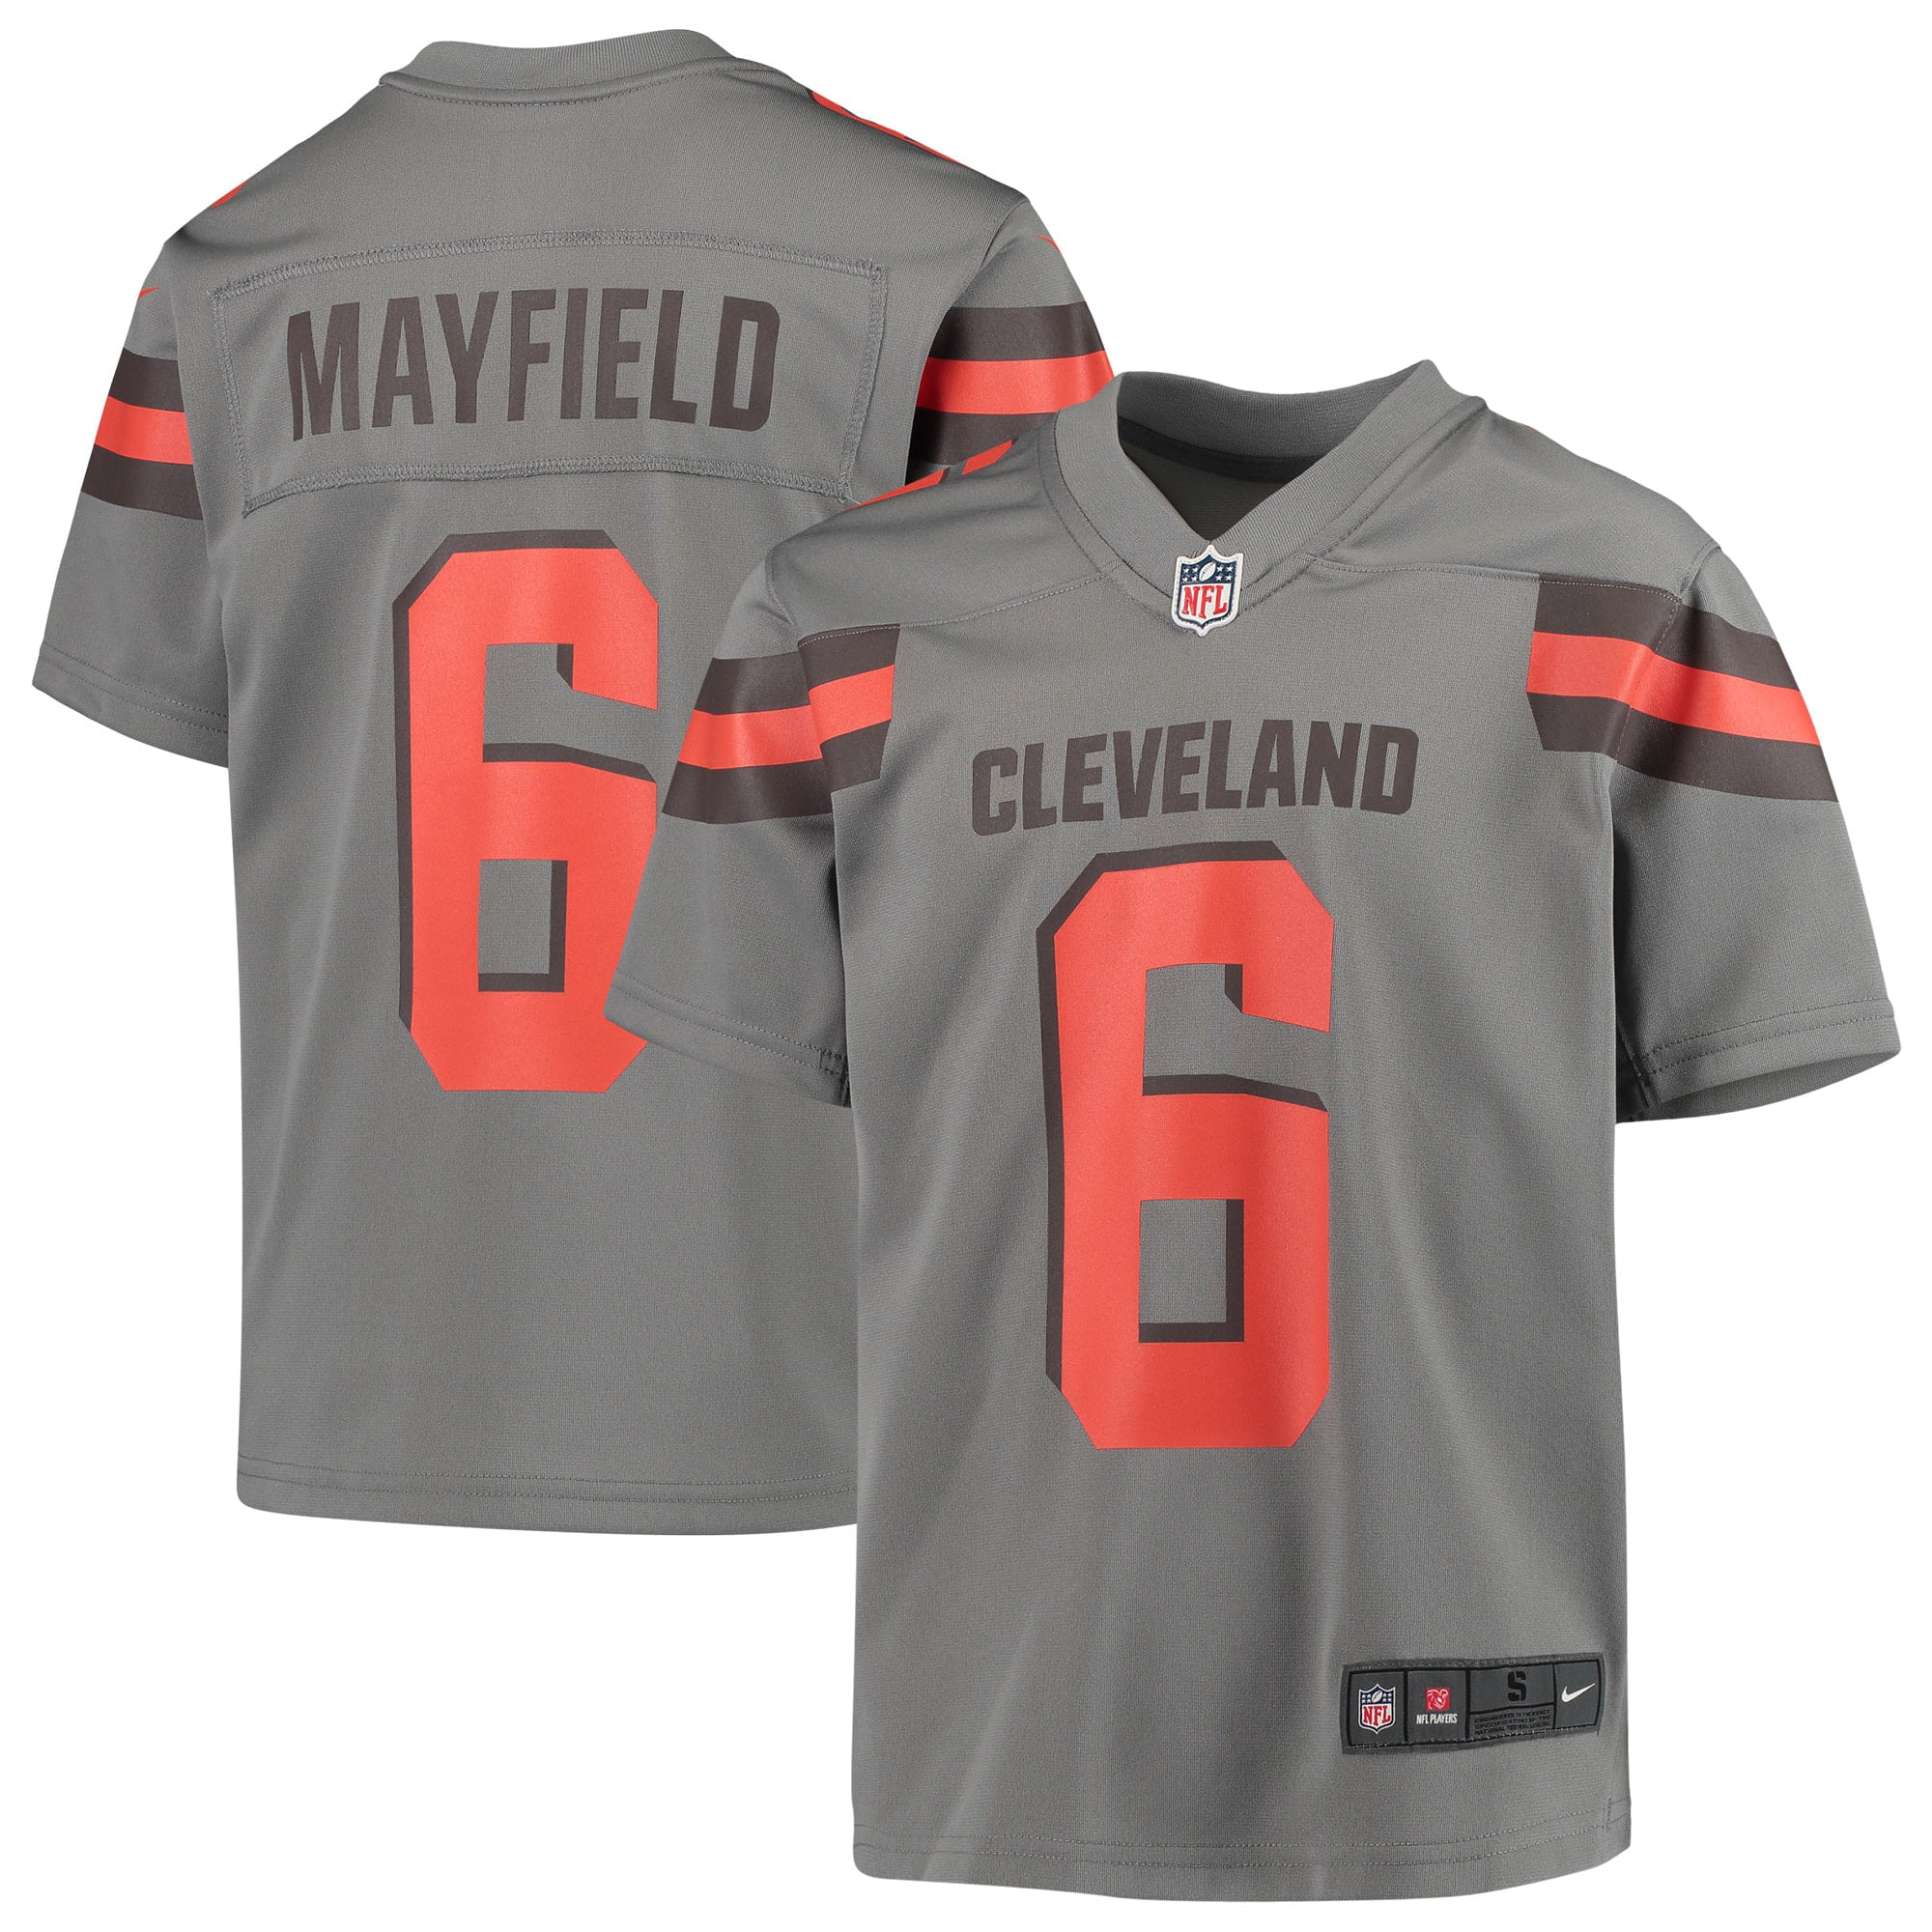 baker mayfield browns jersey youth